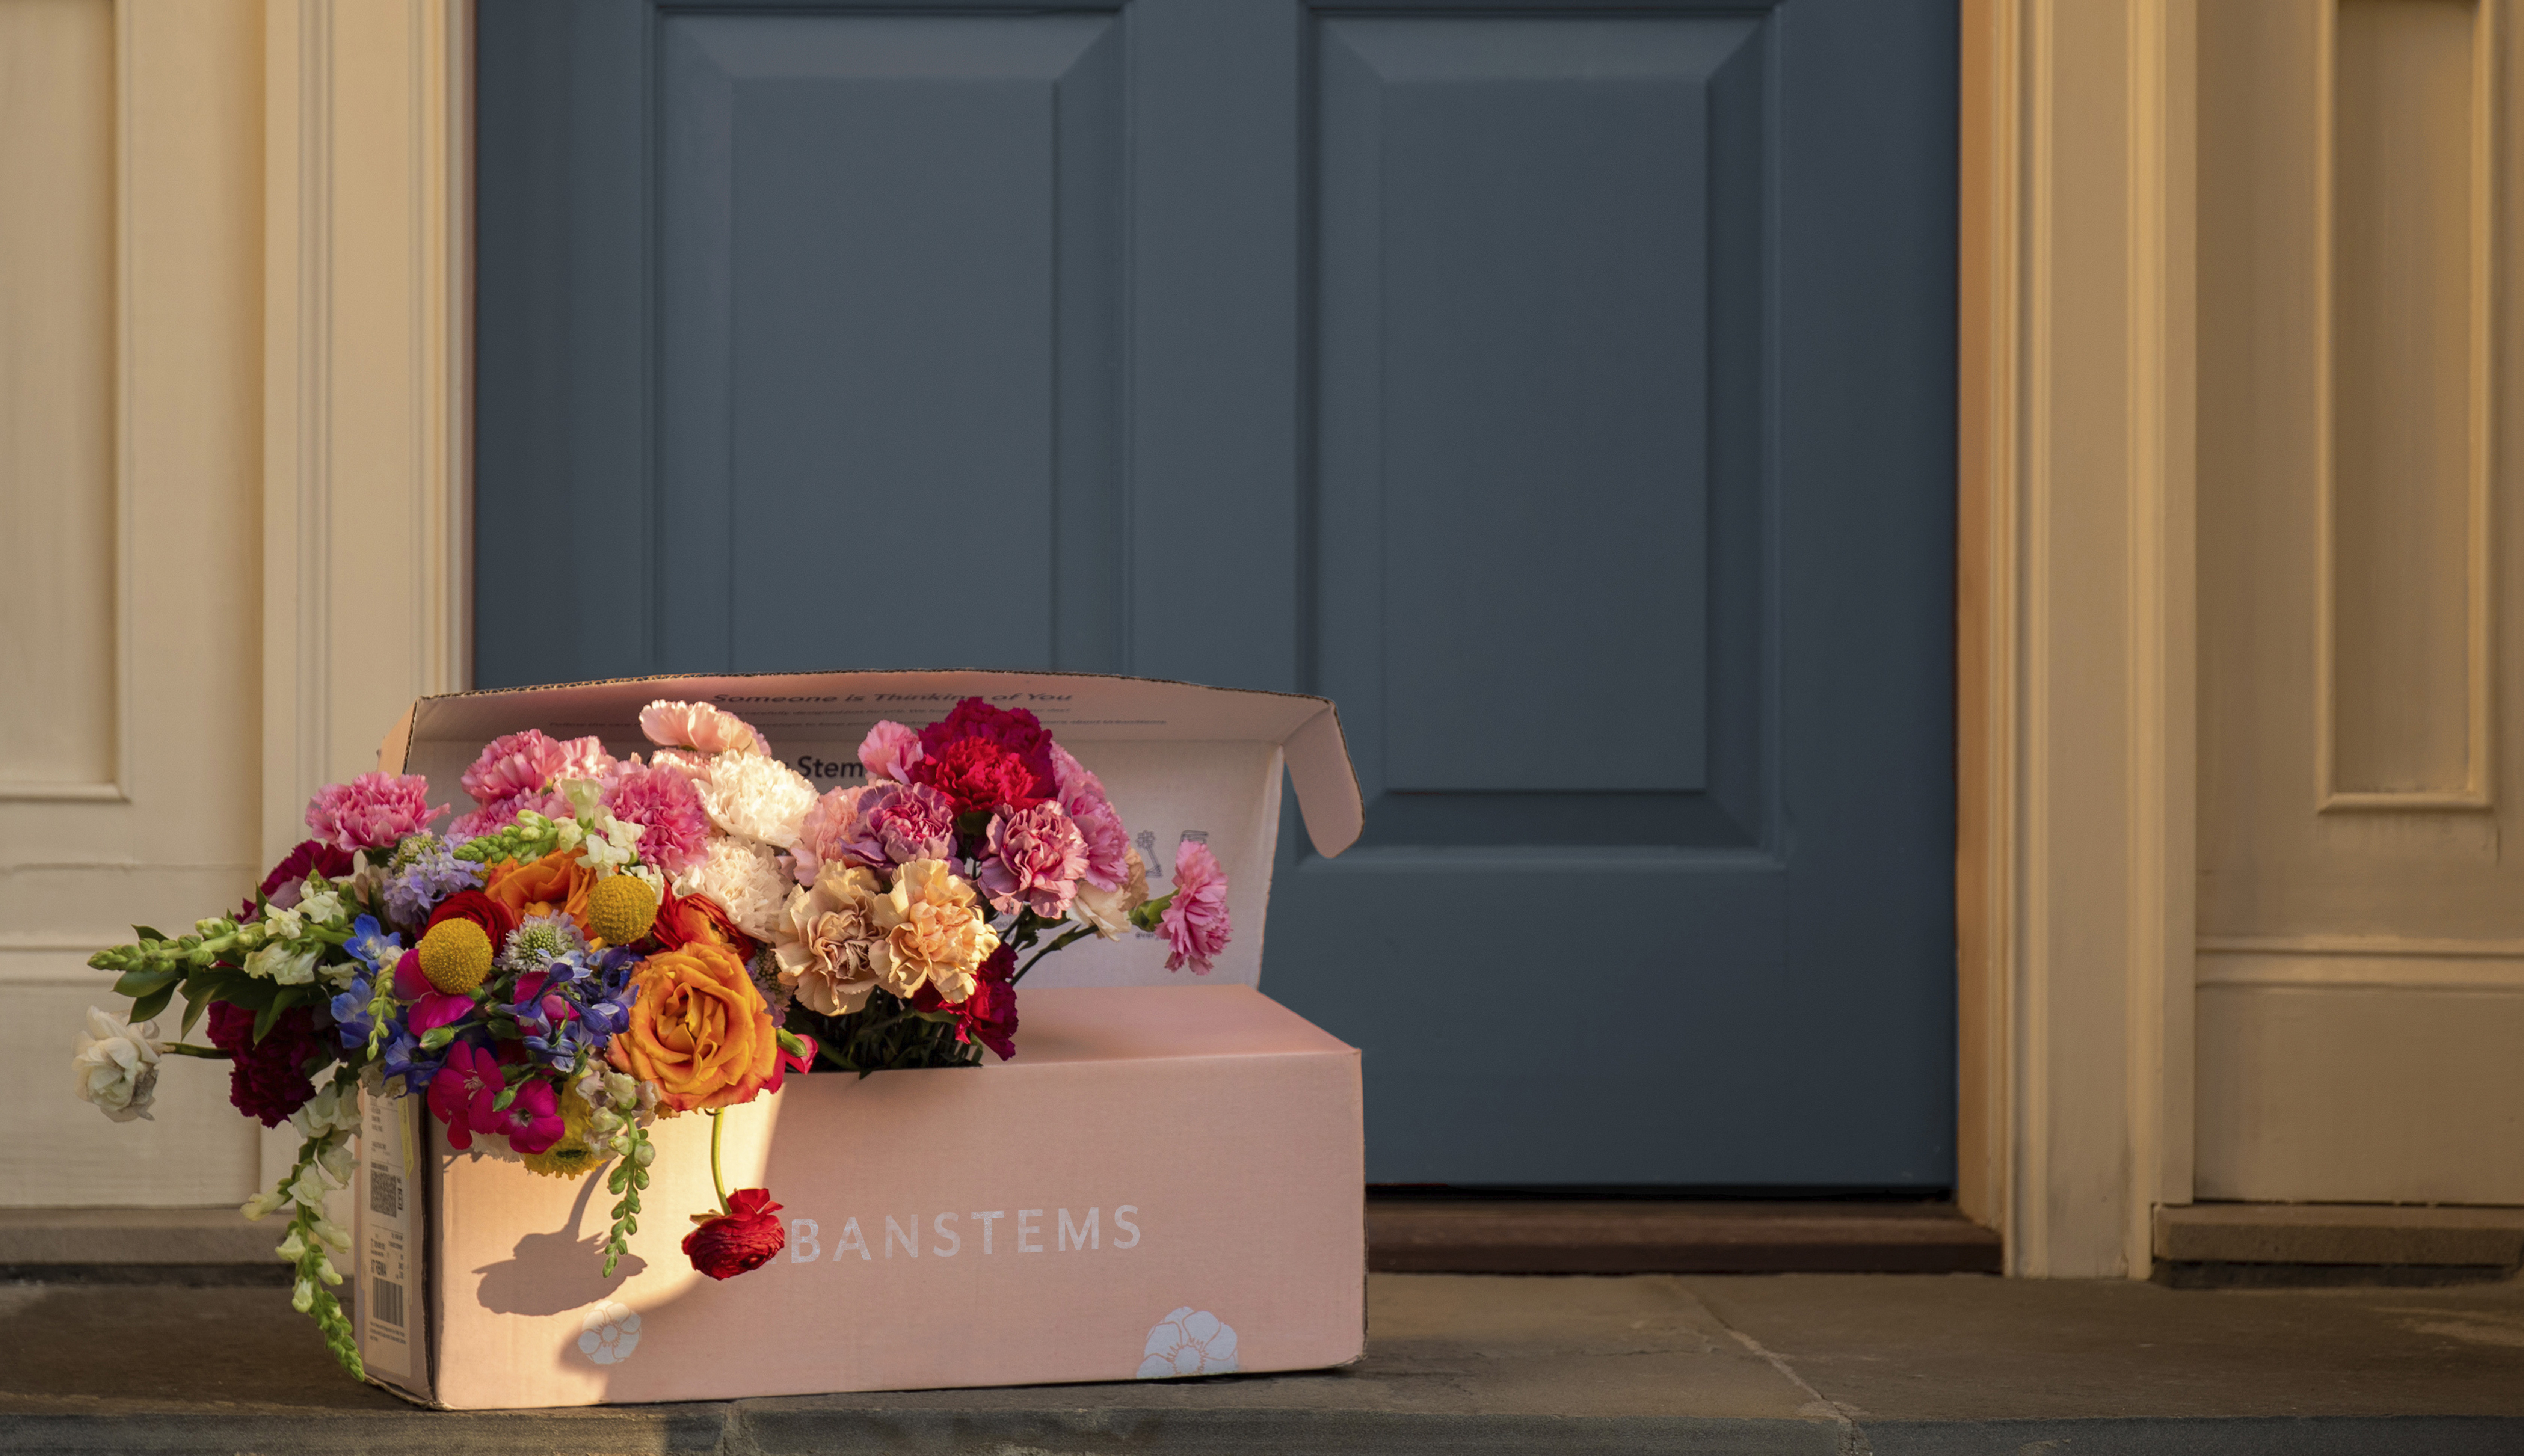 Floral bouquet in same-day deliver box on doorstep